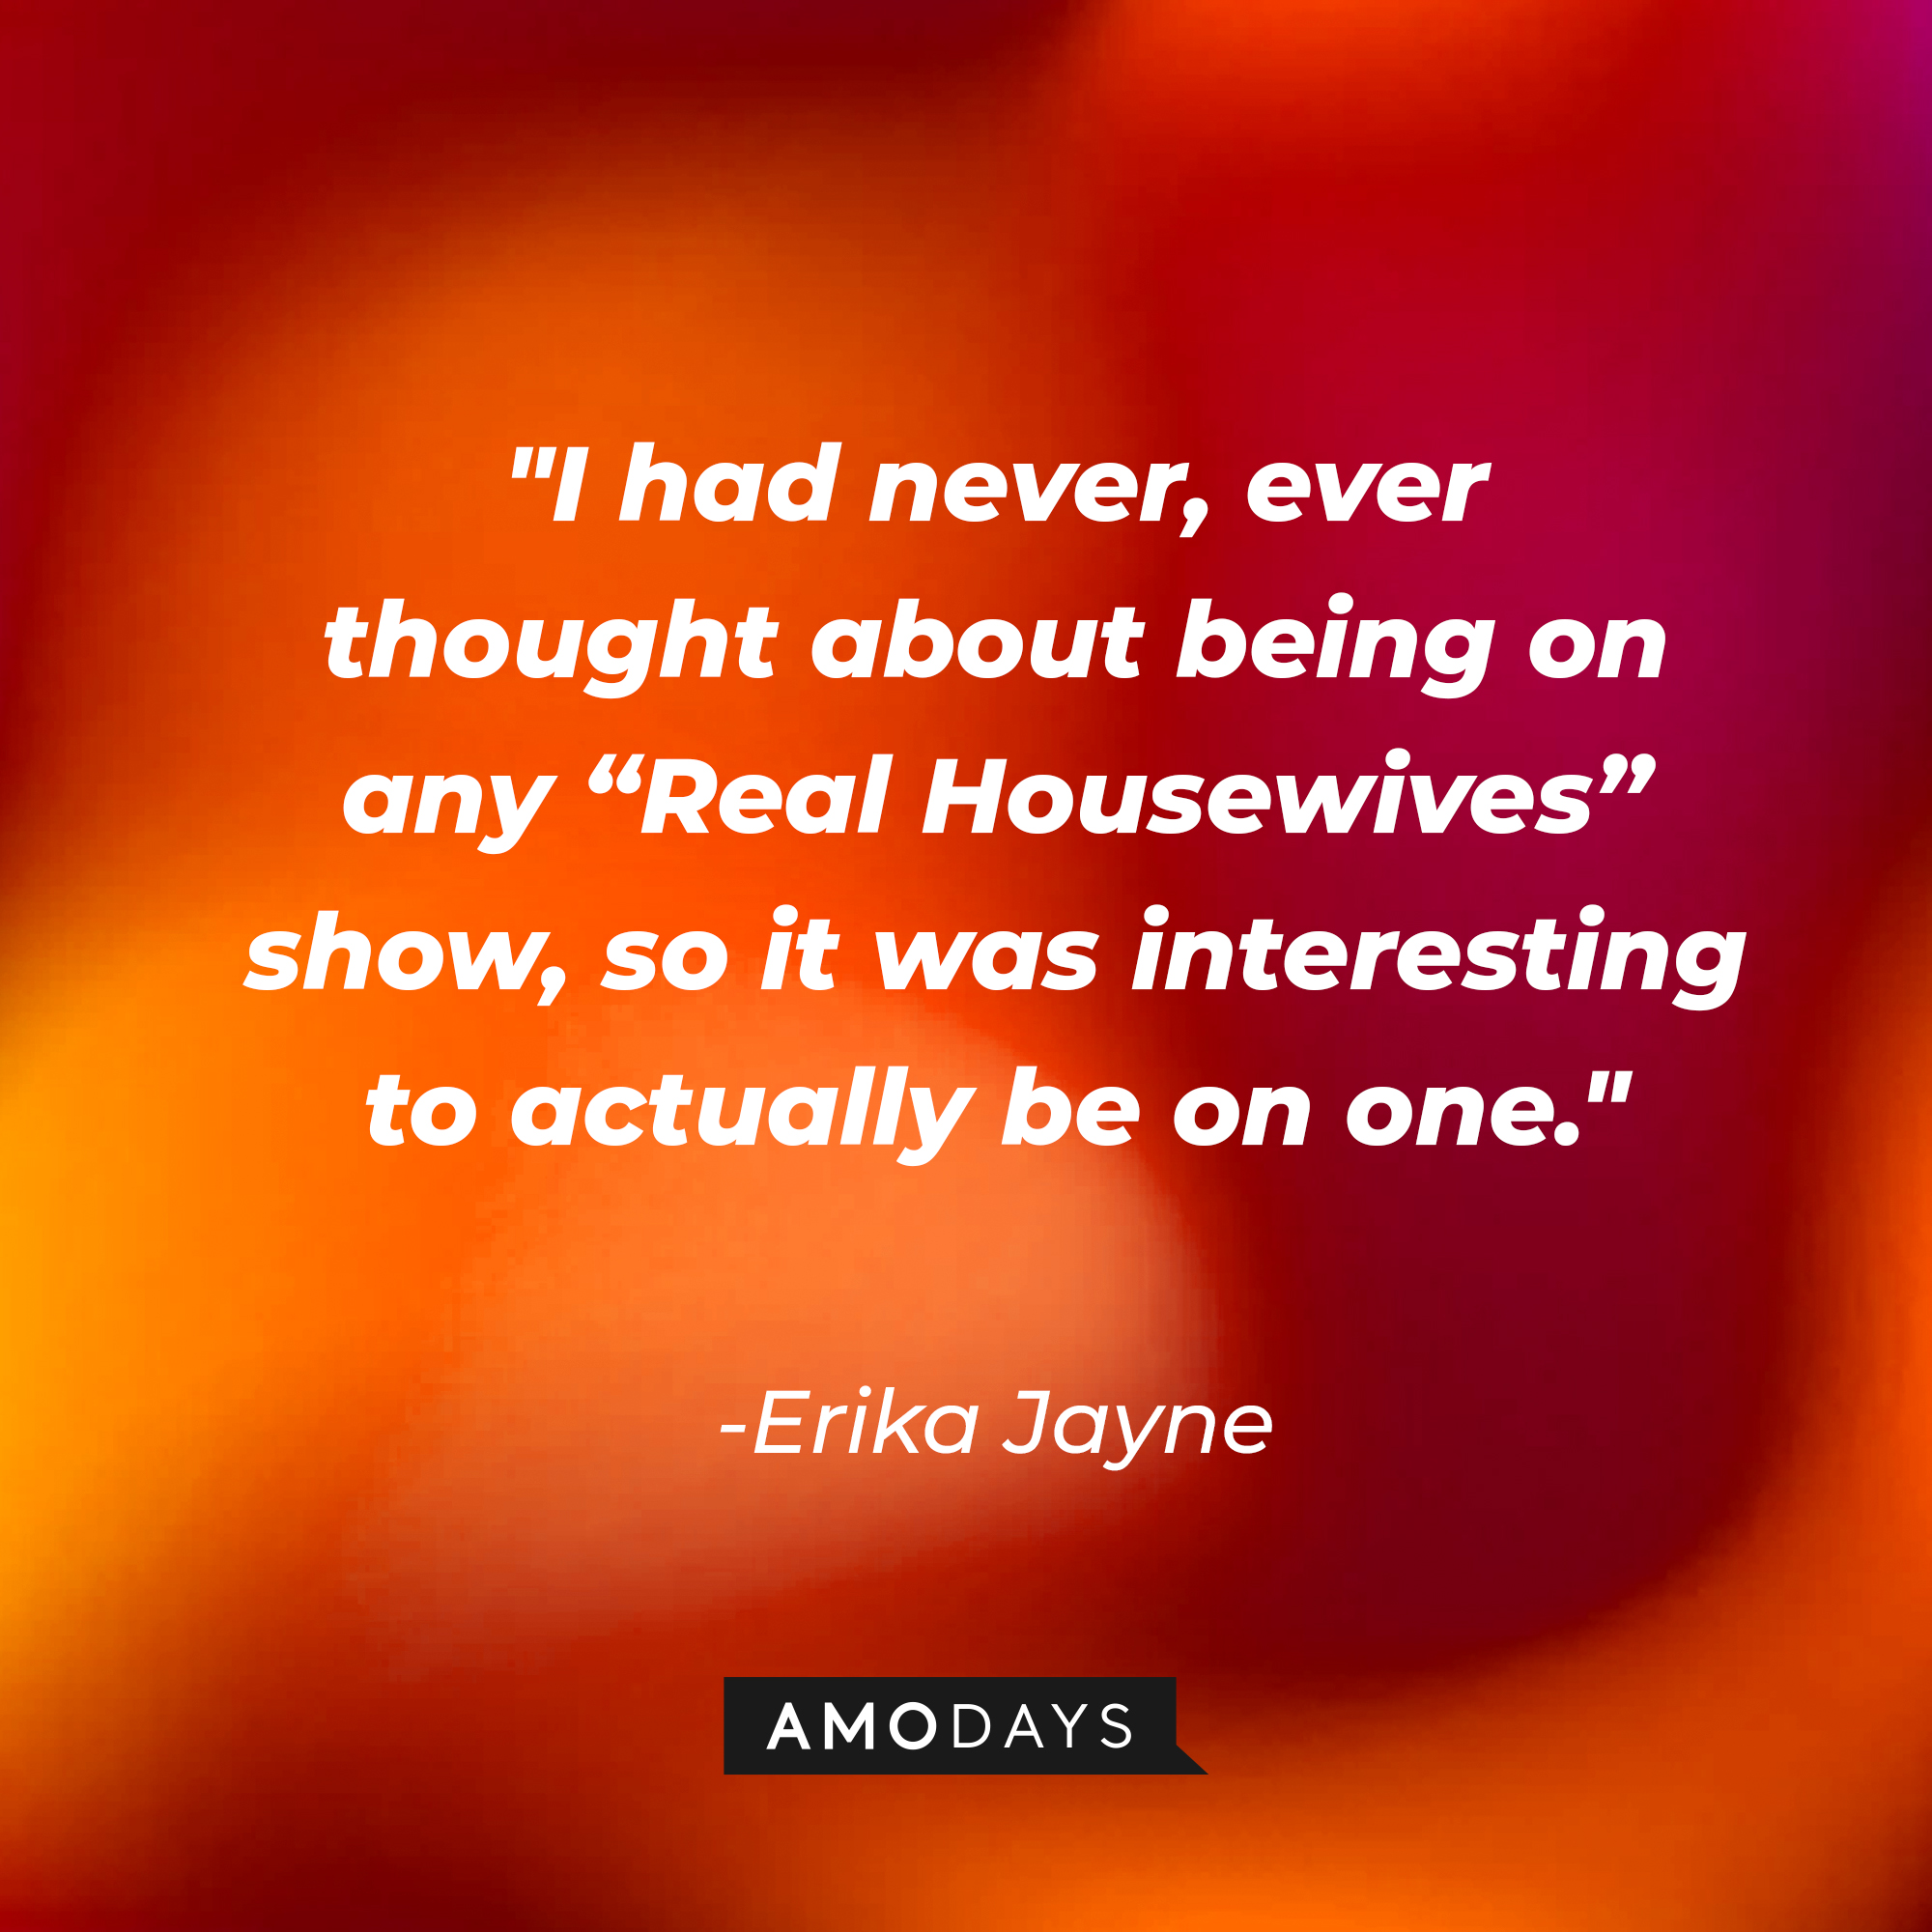 Erika Jayne’s quote: "I had never, ever thought about being on any "Real Housewives" show, so it was interesting to actually be on one." | Image: Amodays